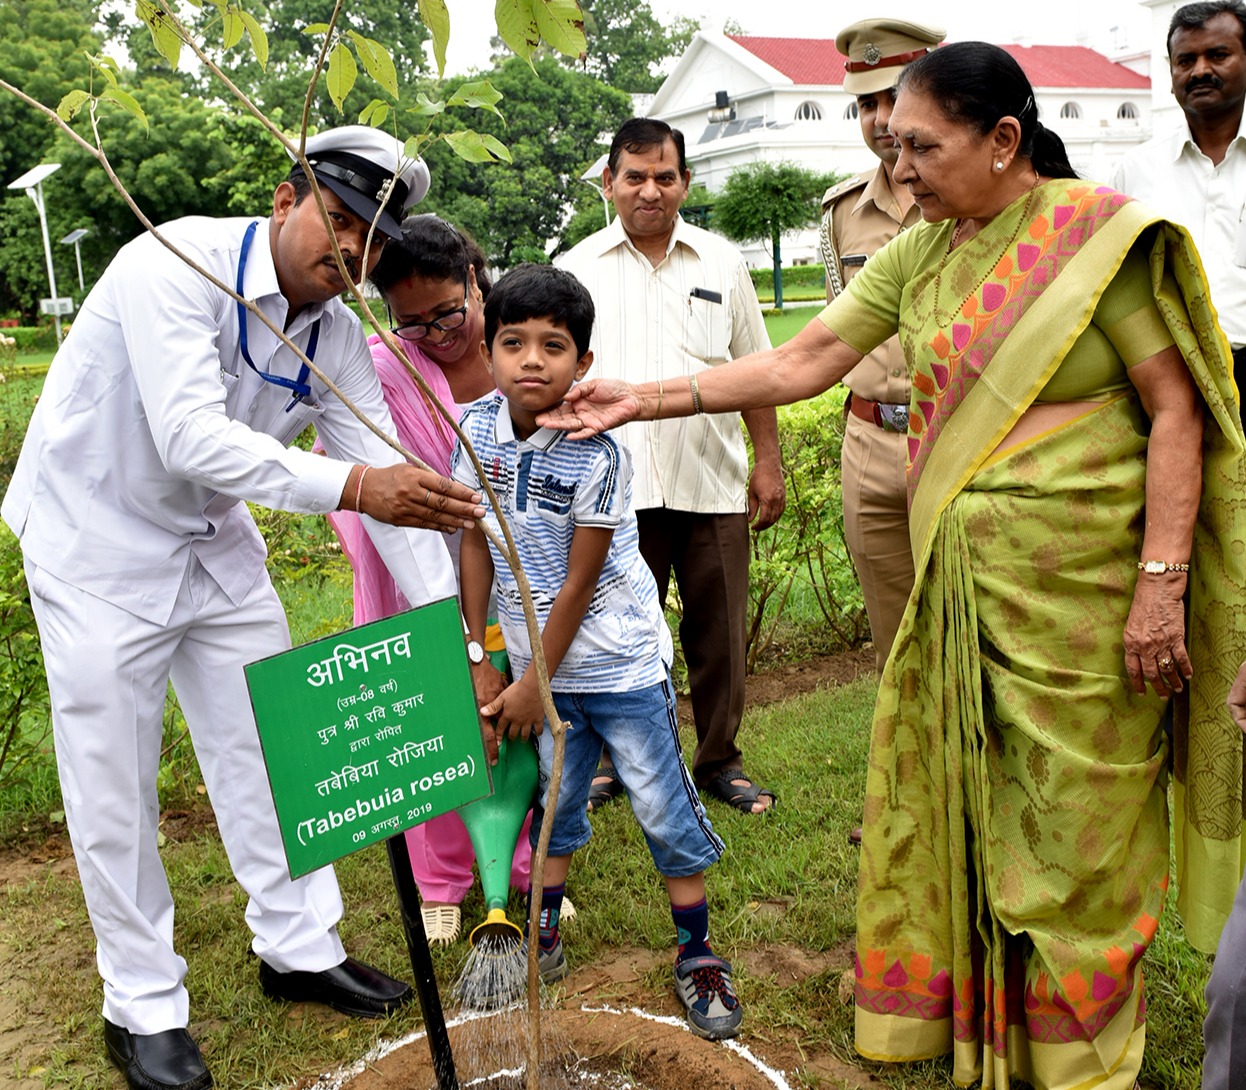 Children of officers and employees of Raj Bhavan planted saplings along with the Governor